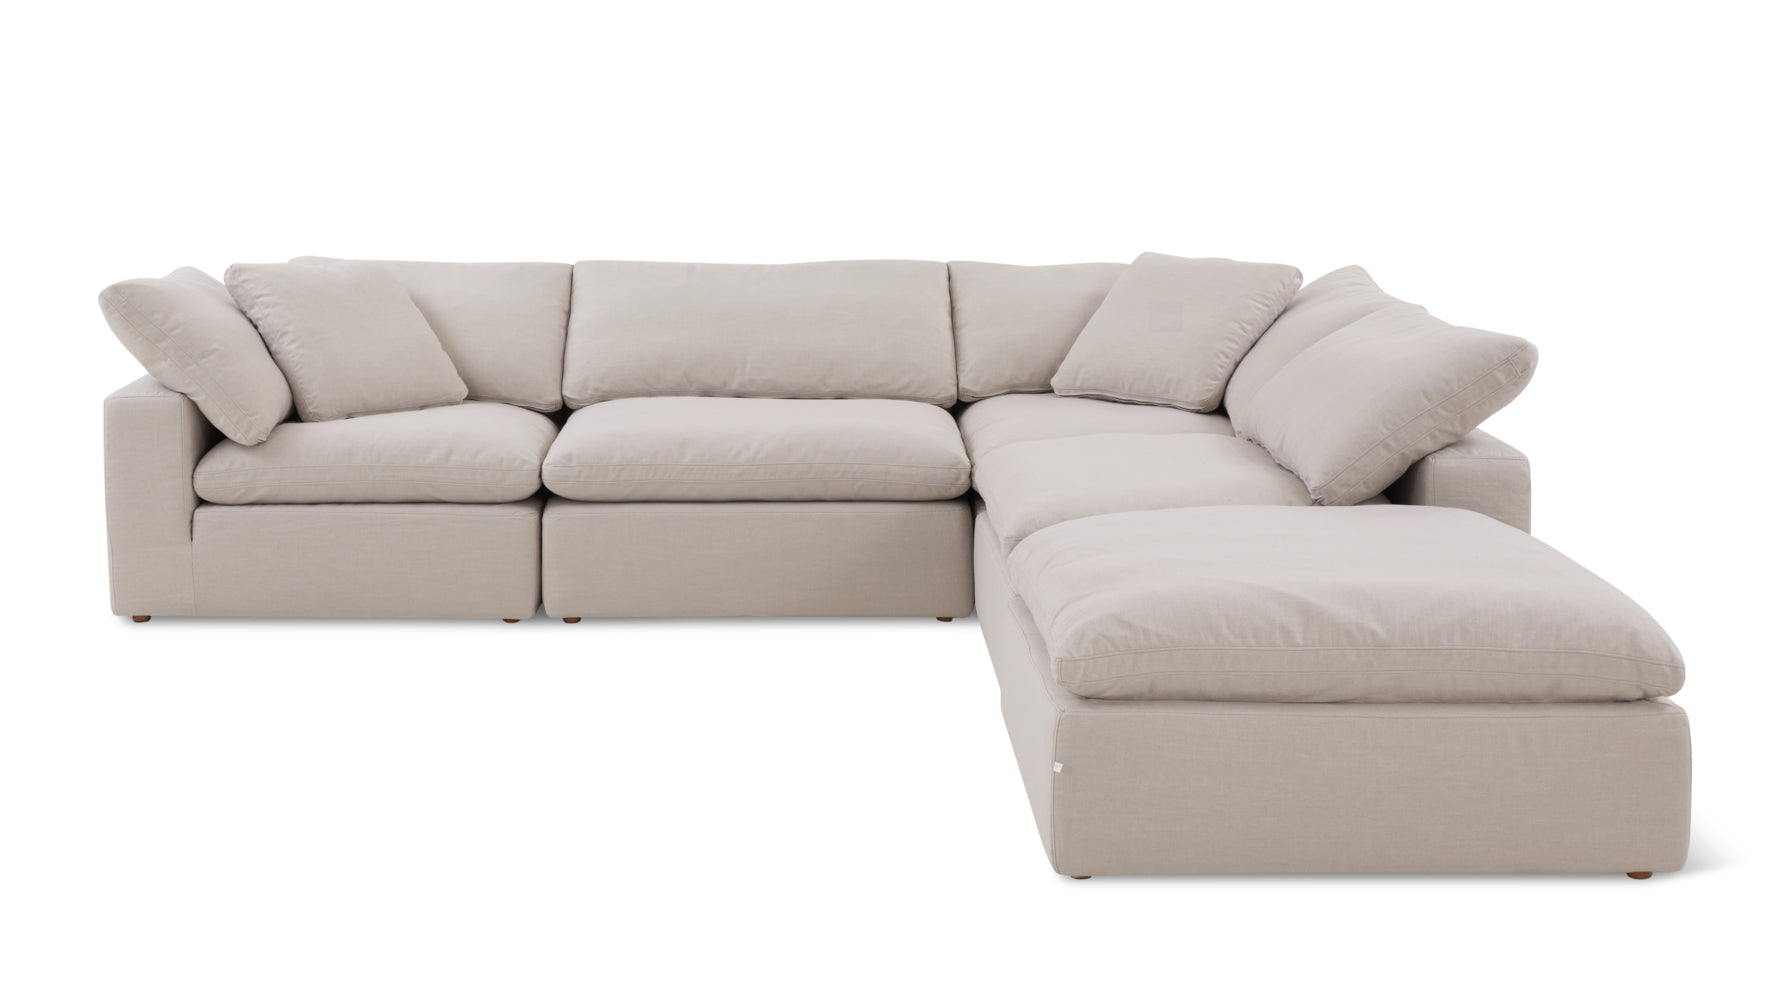 Movie Night™ 5-Piece Modular Sectional, Large, Clay - Image 1